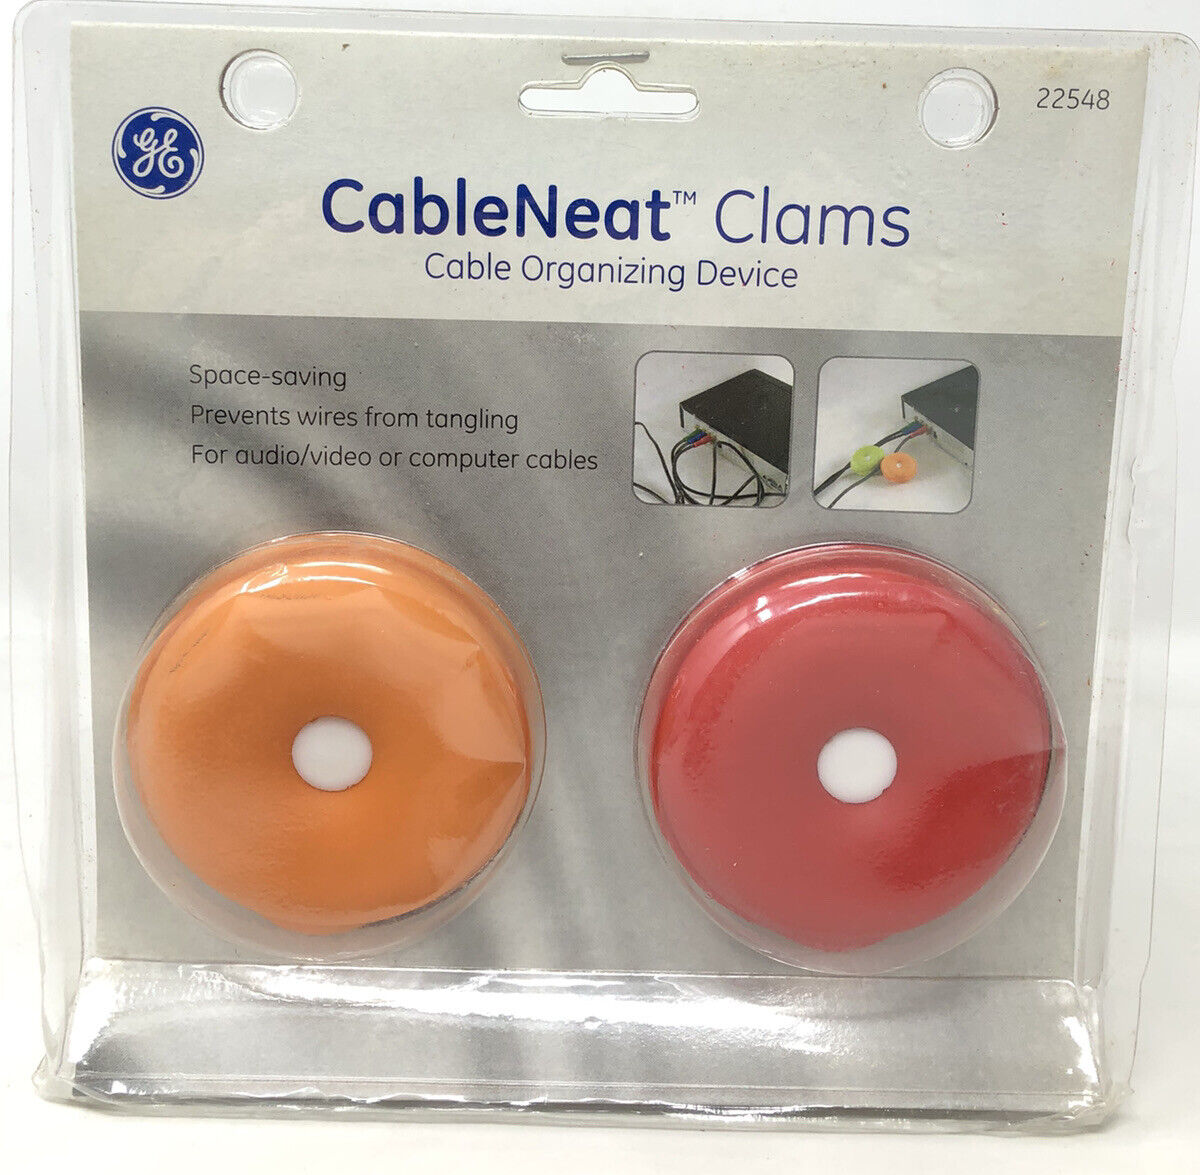 GE Cable Neat Clams Cable Organizing Device Tie Ball-shaped Rubber NOS Computer